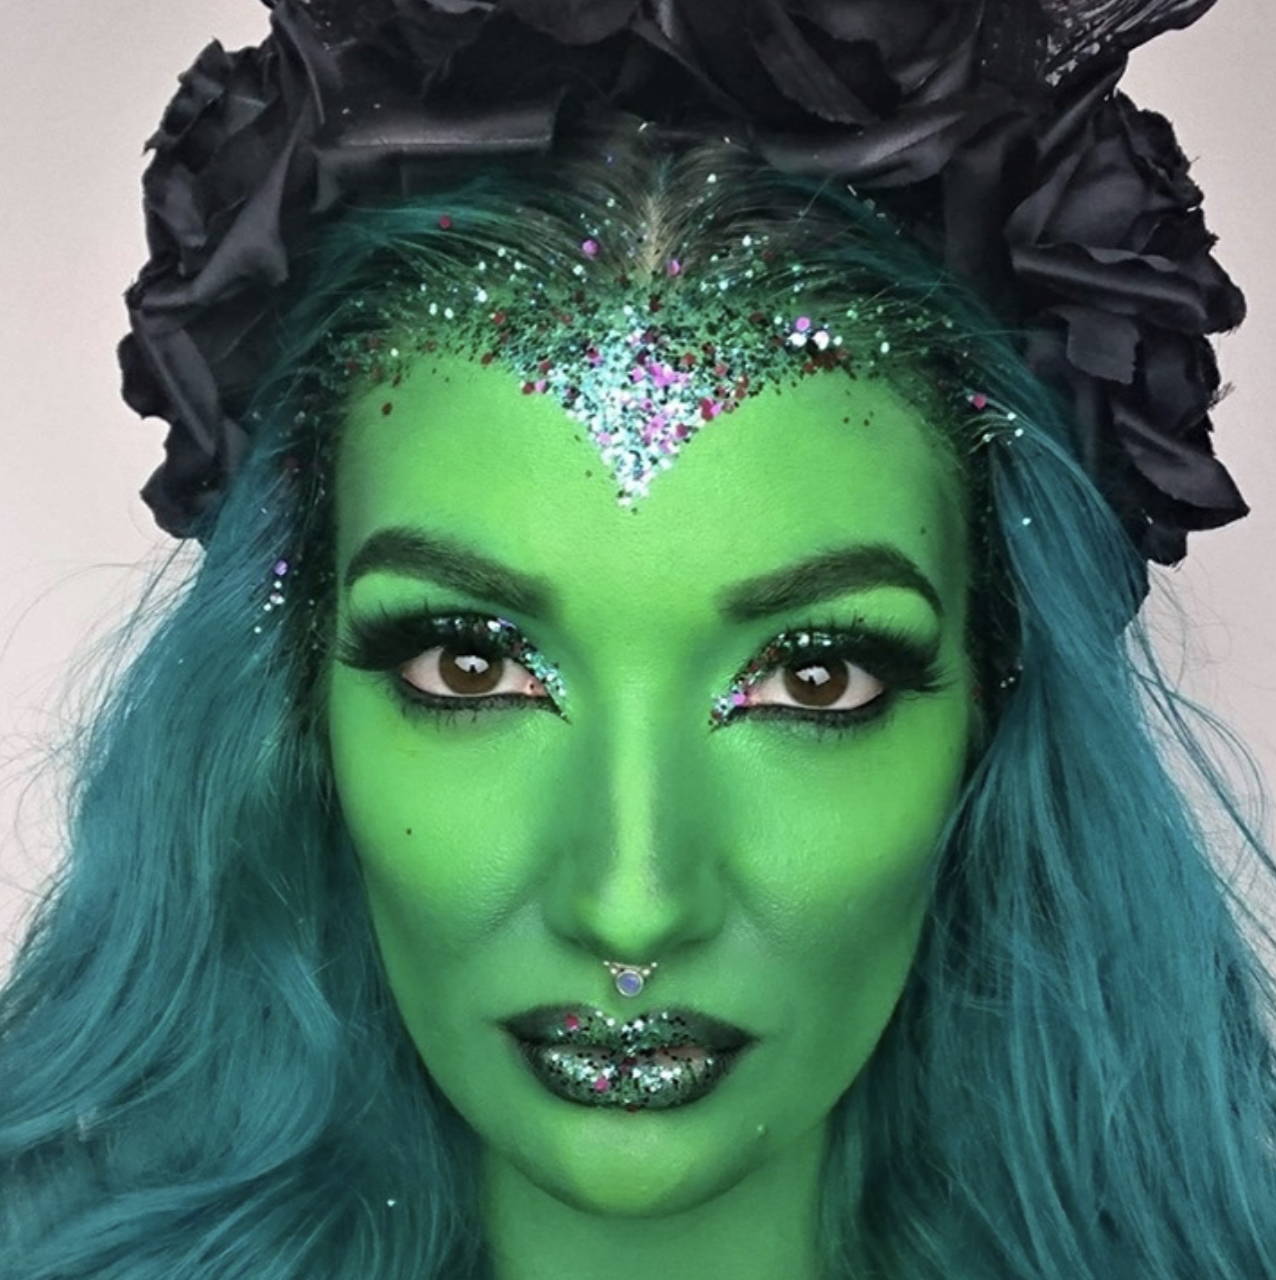 A green halloween makeup look inspired by Elphaba from wicked. Model has green face paint topped off with green and purple bioglitter.